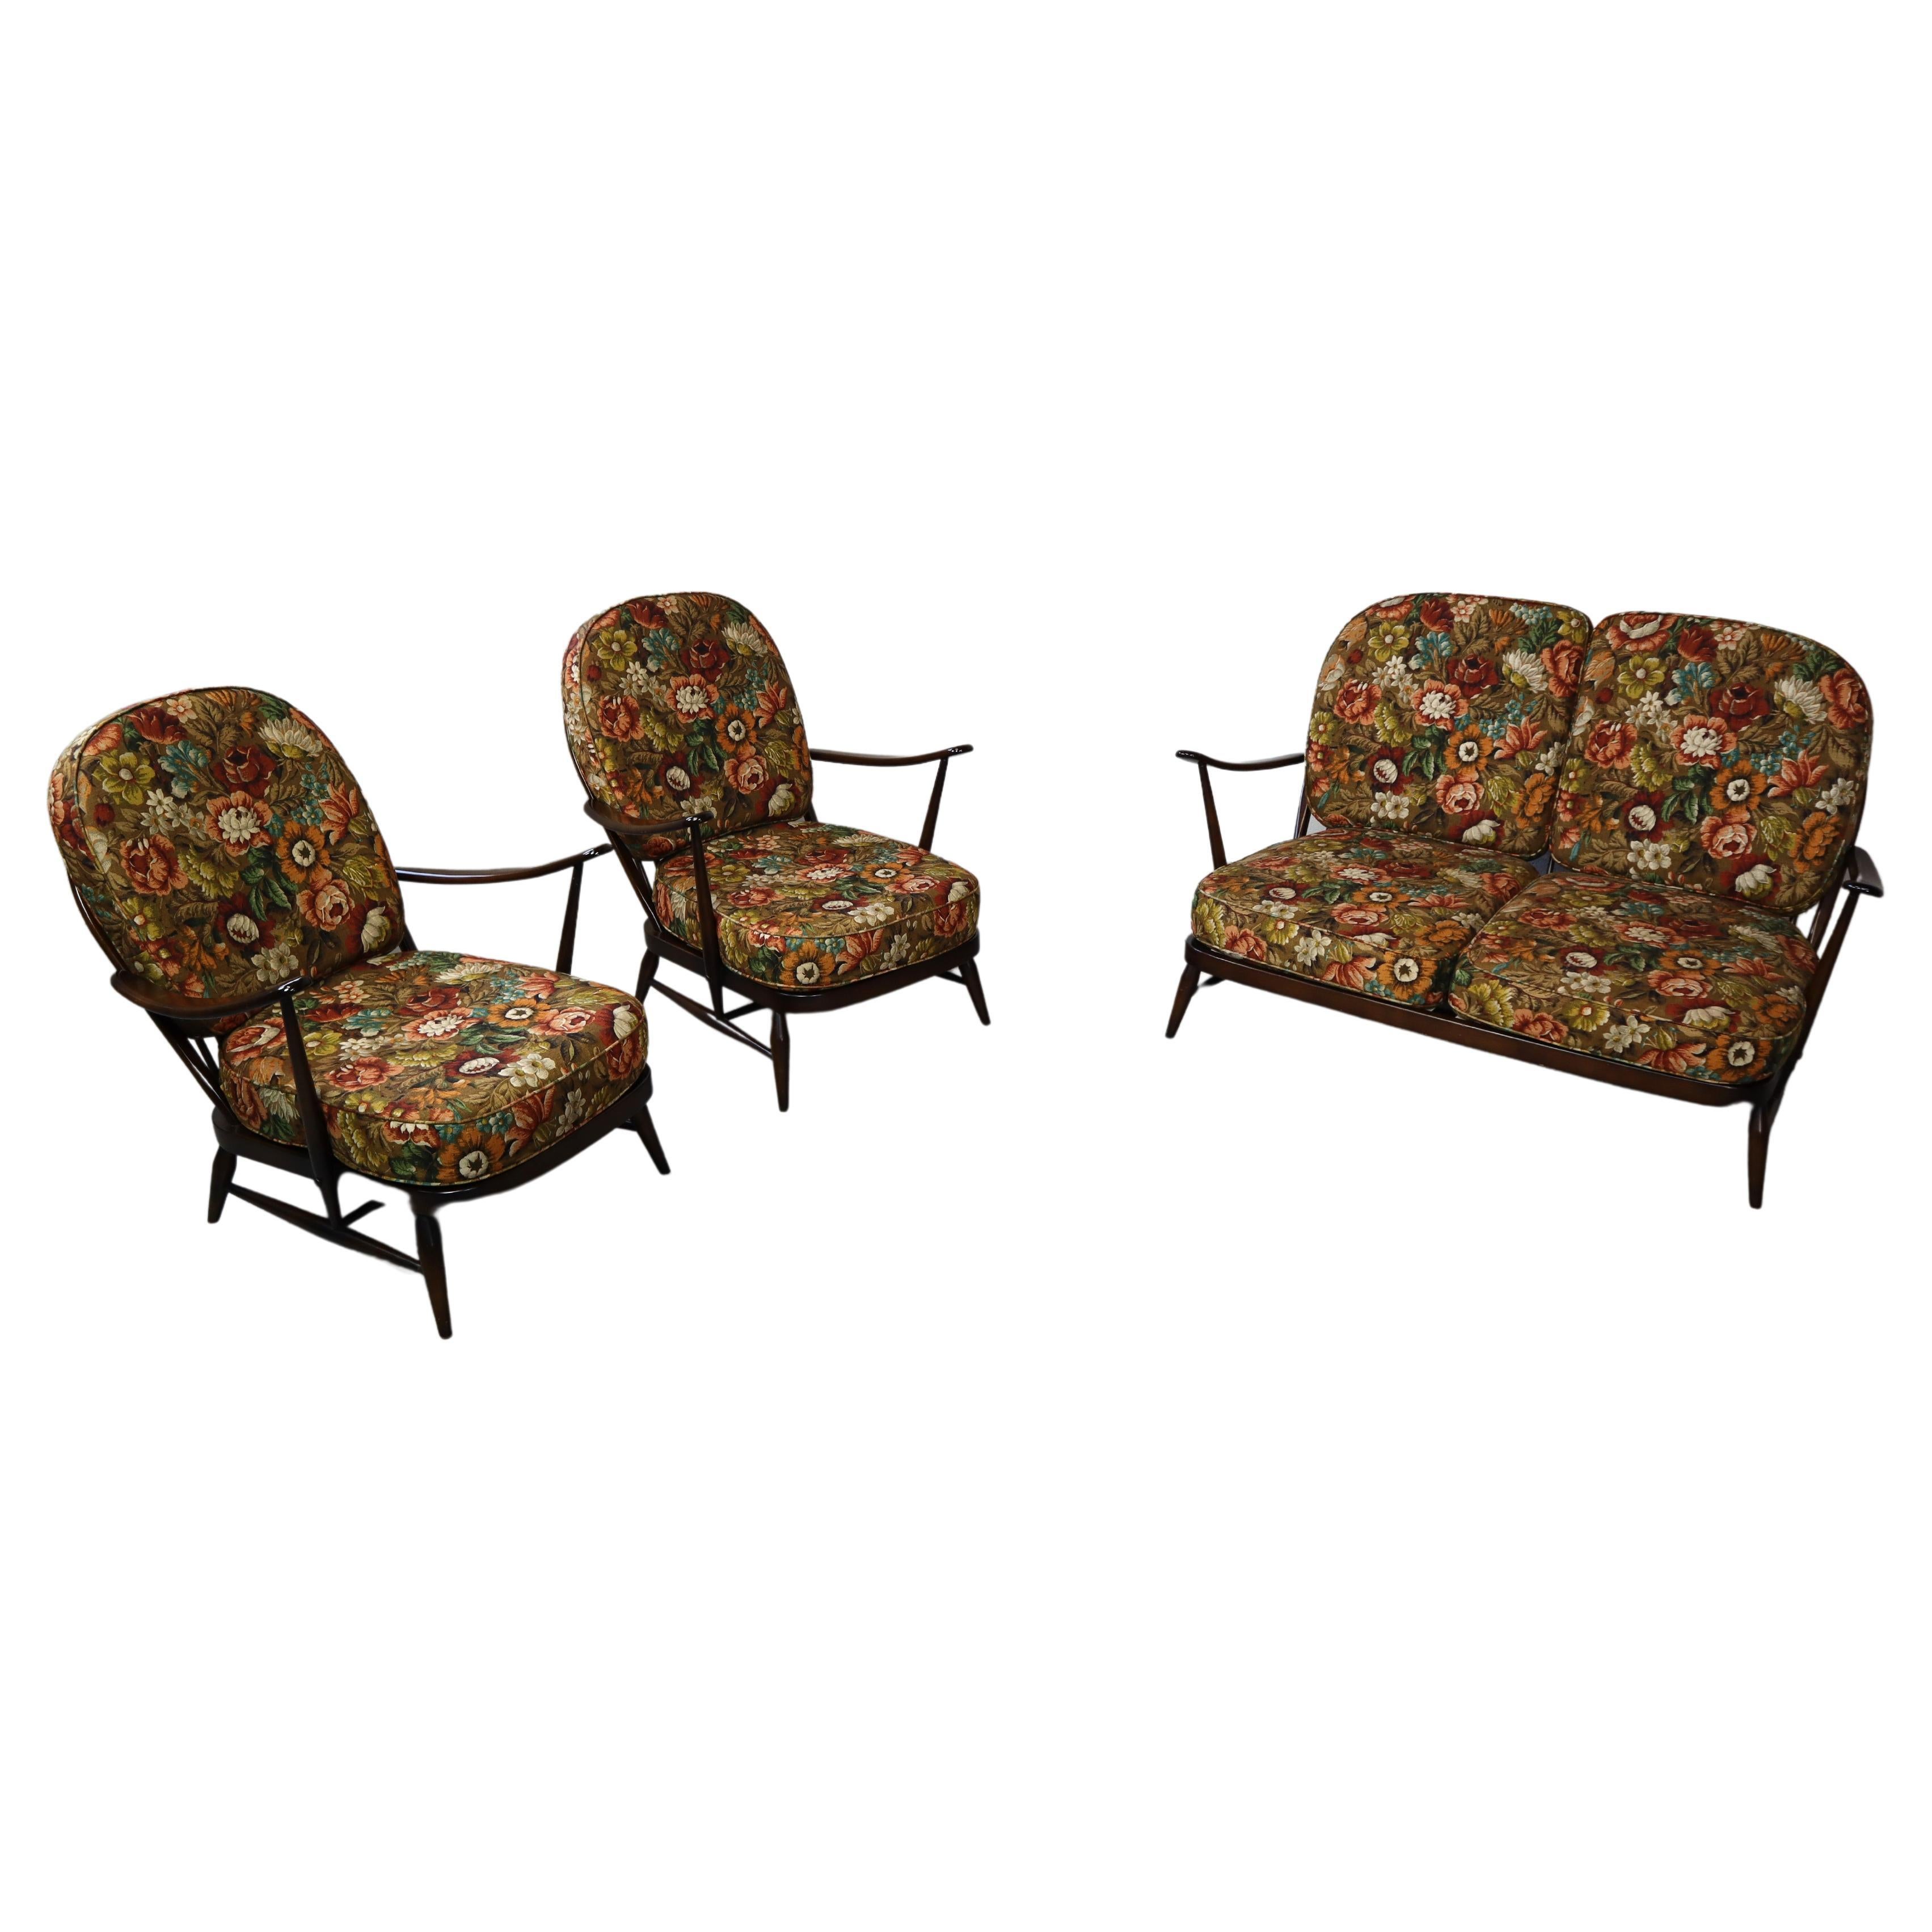 Two Seater Sofa and Two Armchairs "Windsor" by Ercol, 1970s